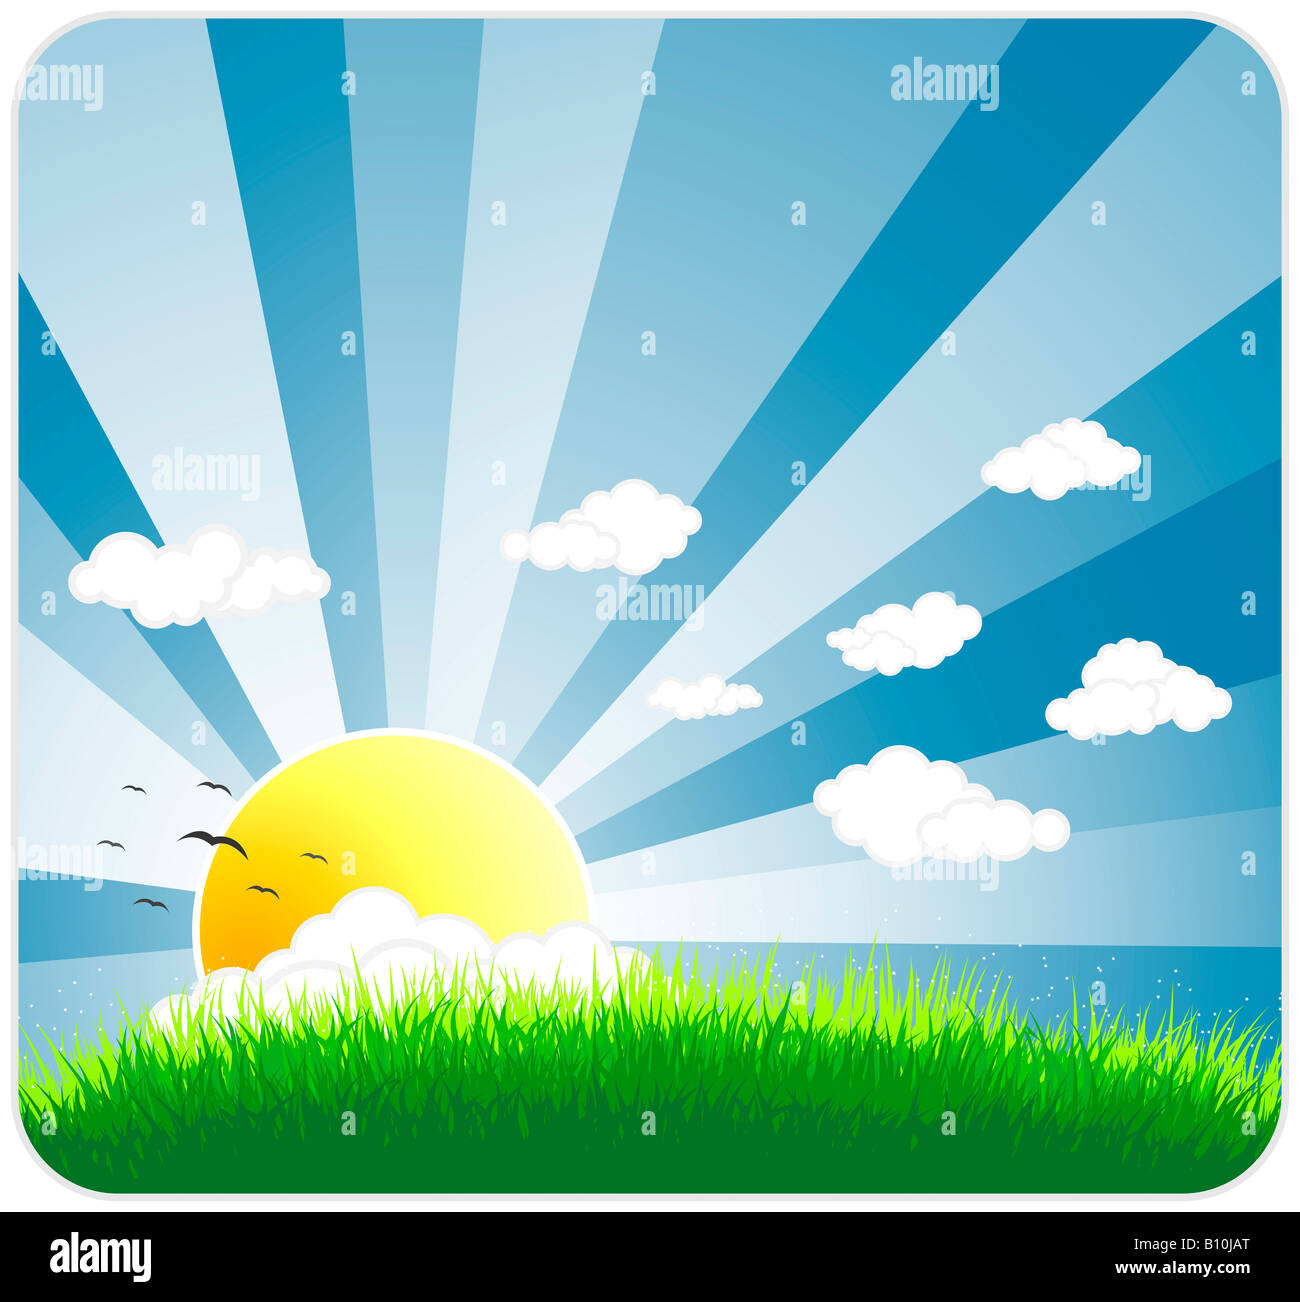 Vector illustration of an idyllic sunny nature background with a blue gradient stripes sky birds green grass layers of grass Stock Photo